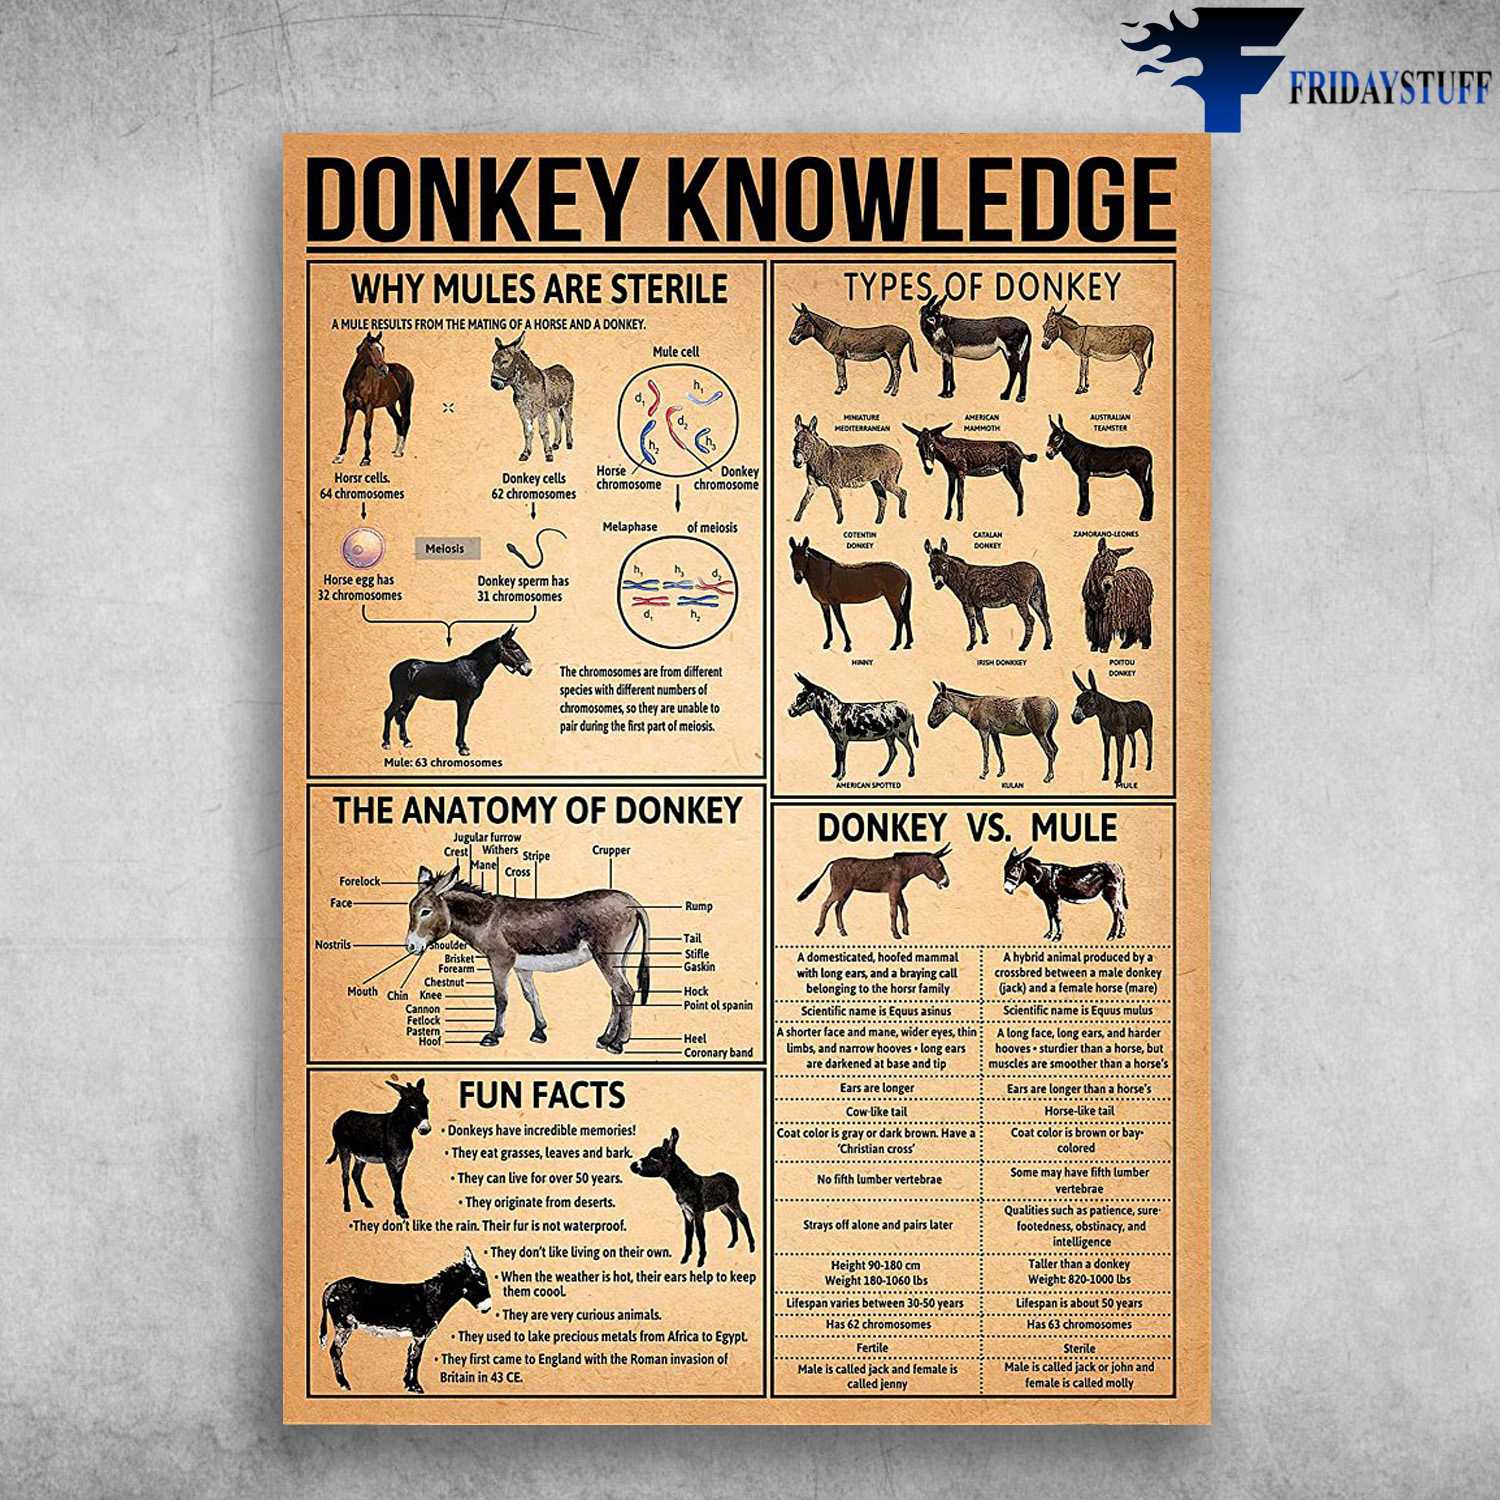 Donkey Knowledge - Why Mules Are Sterile, Types Of Donkey, The Anatomy Of Donkey, Donkey VS. Mule, Fun Facts